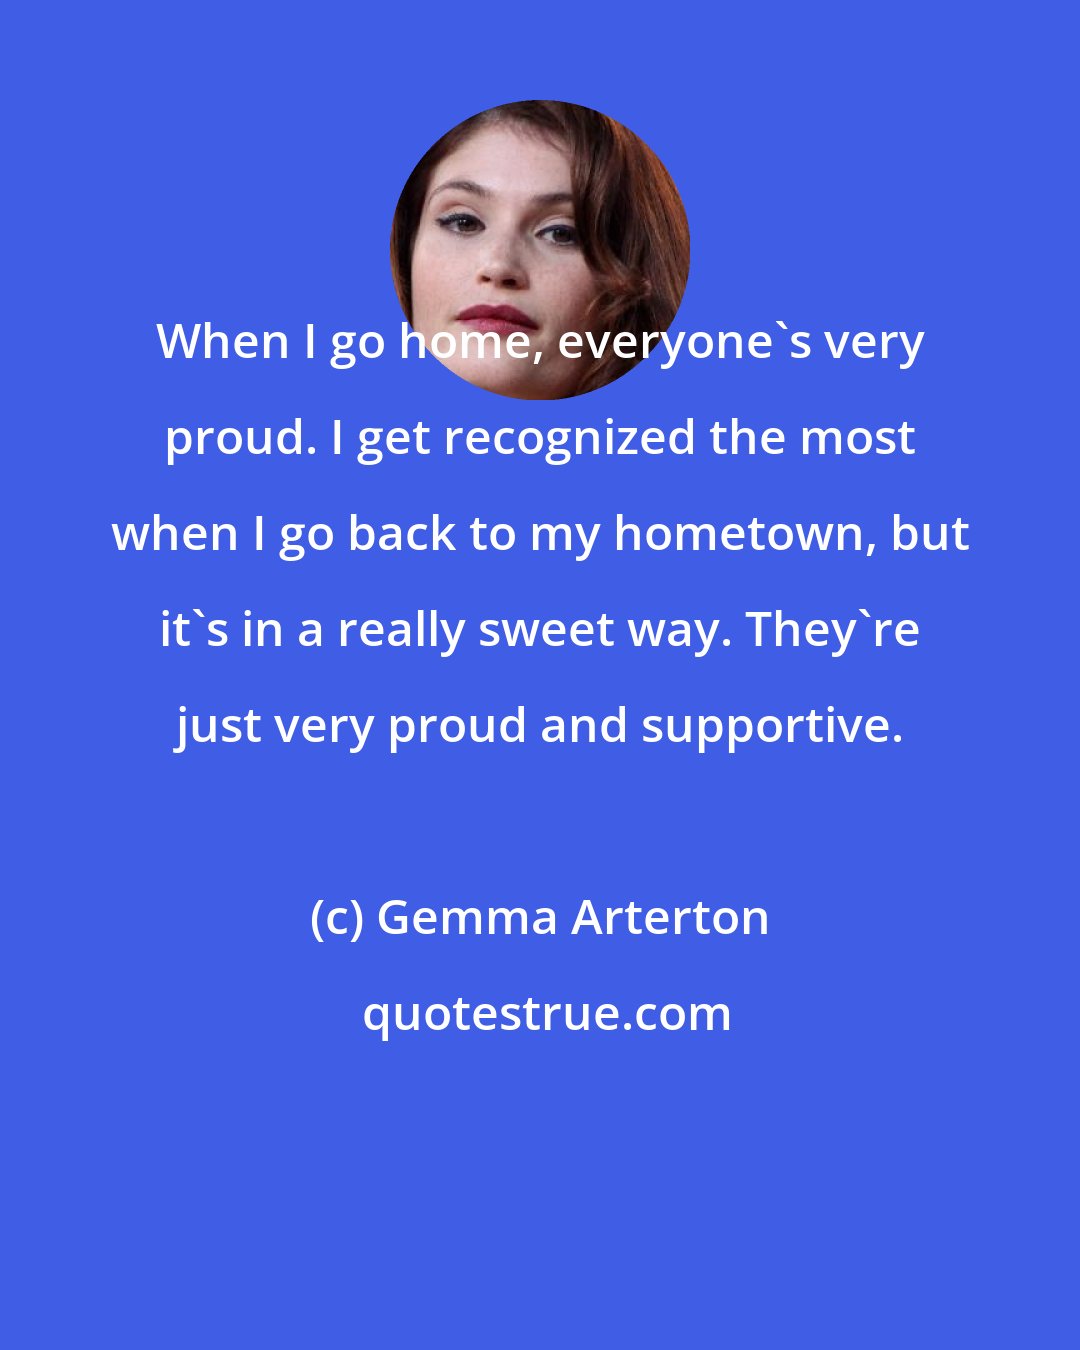 Gemma Arterton: When I go home, everyone's very proud. I get recognized the most when I go back to my hometown, but it's in a really sweet way. They're just very proud and supportive.